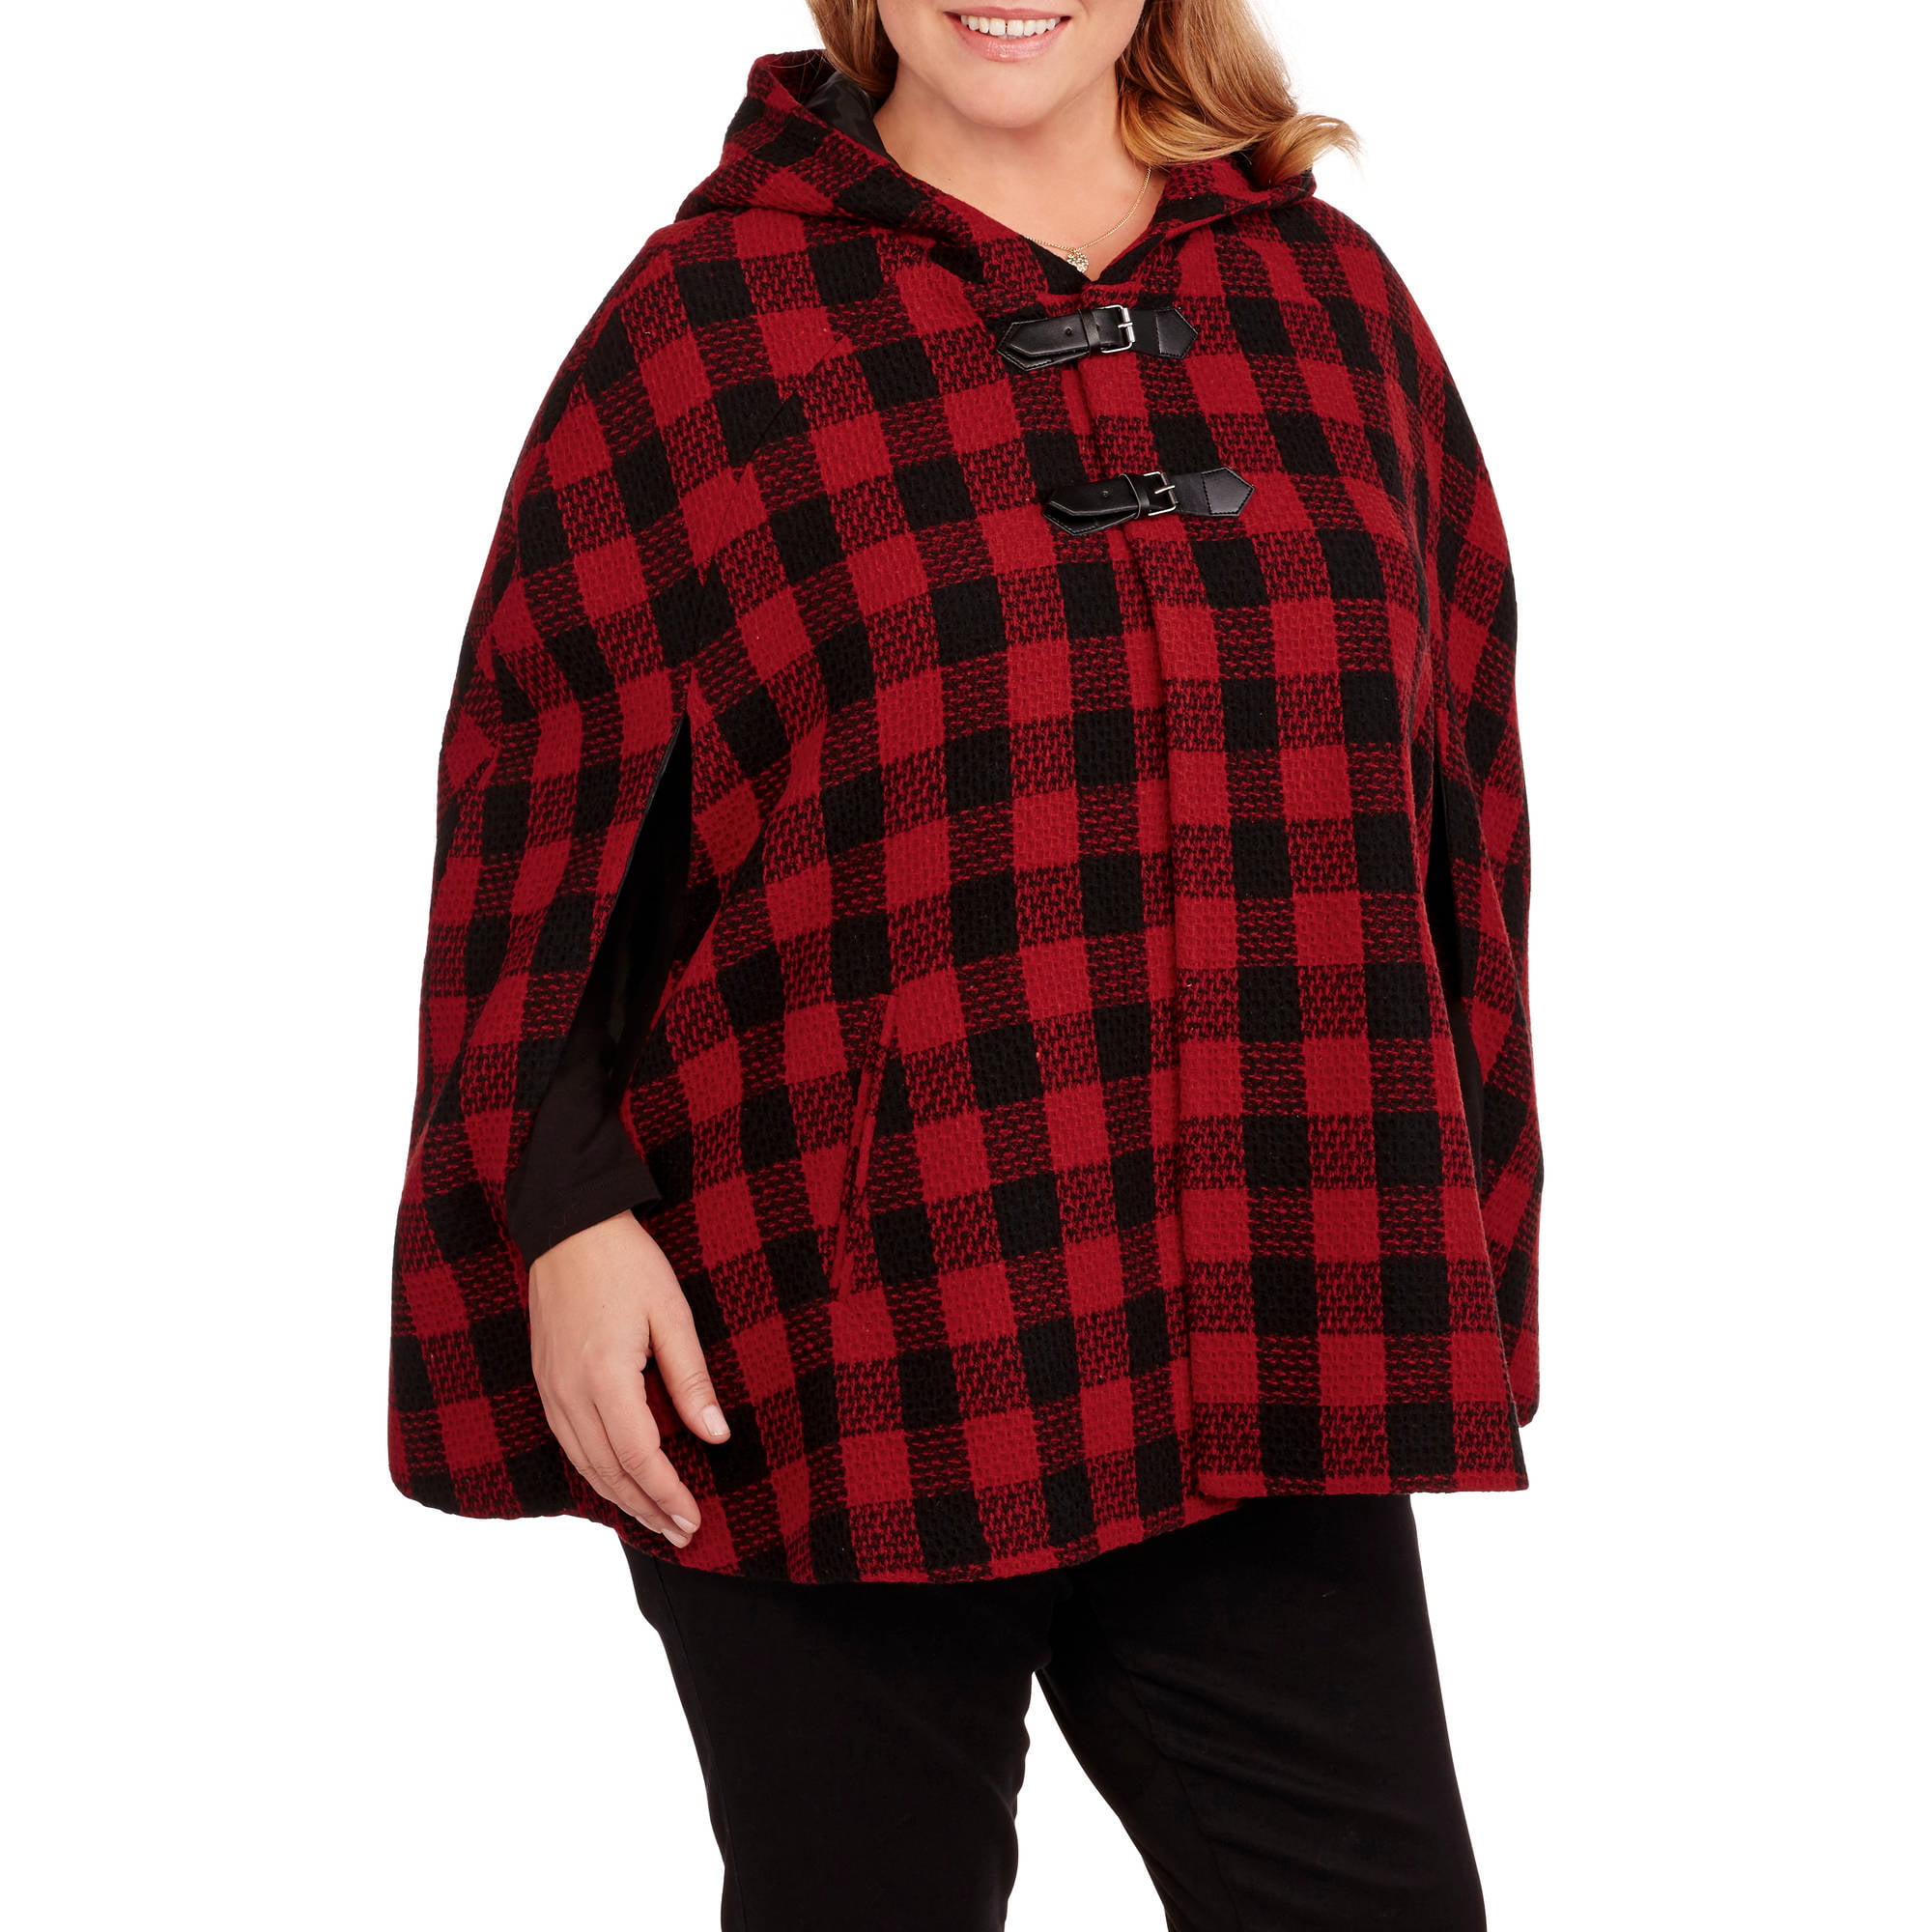 Maxwell Studio Women's Plus-Size Hooded Plaid Cape with Faux Leather ...